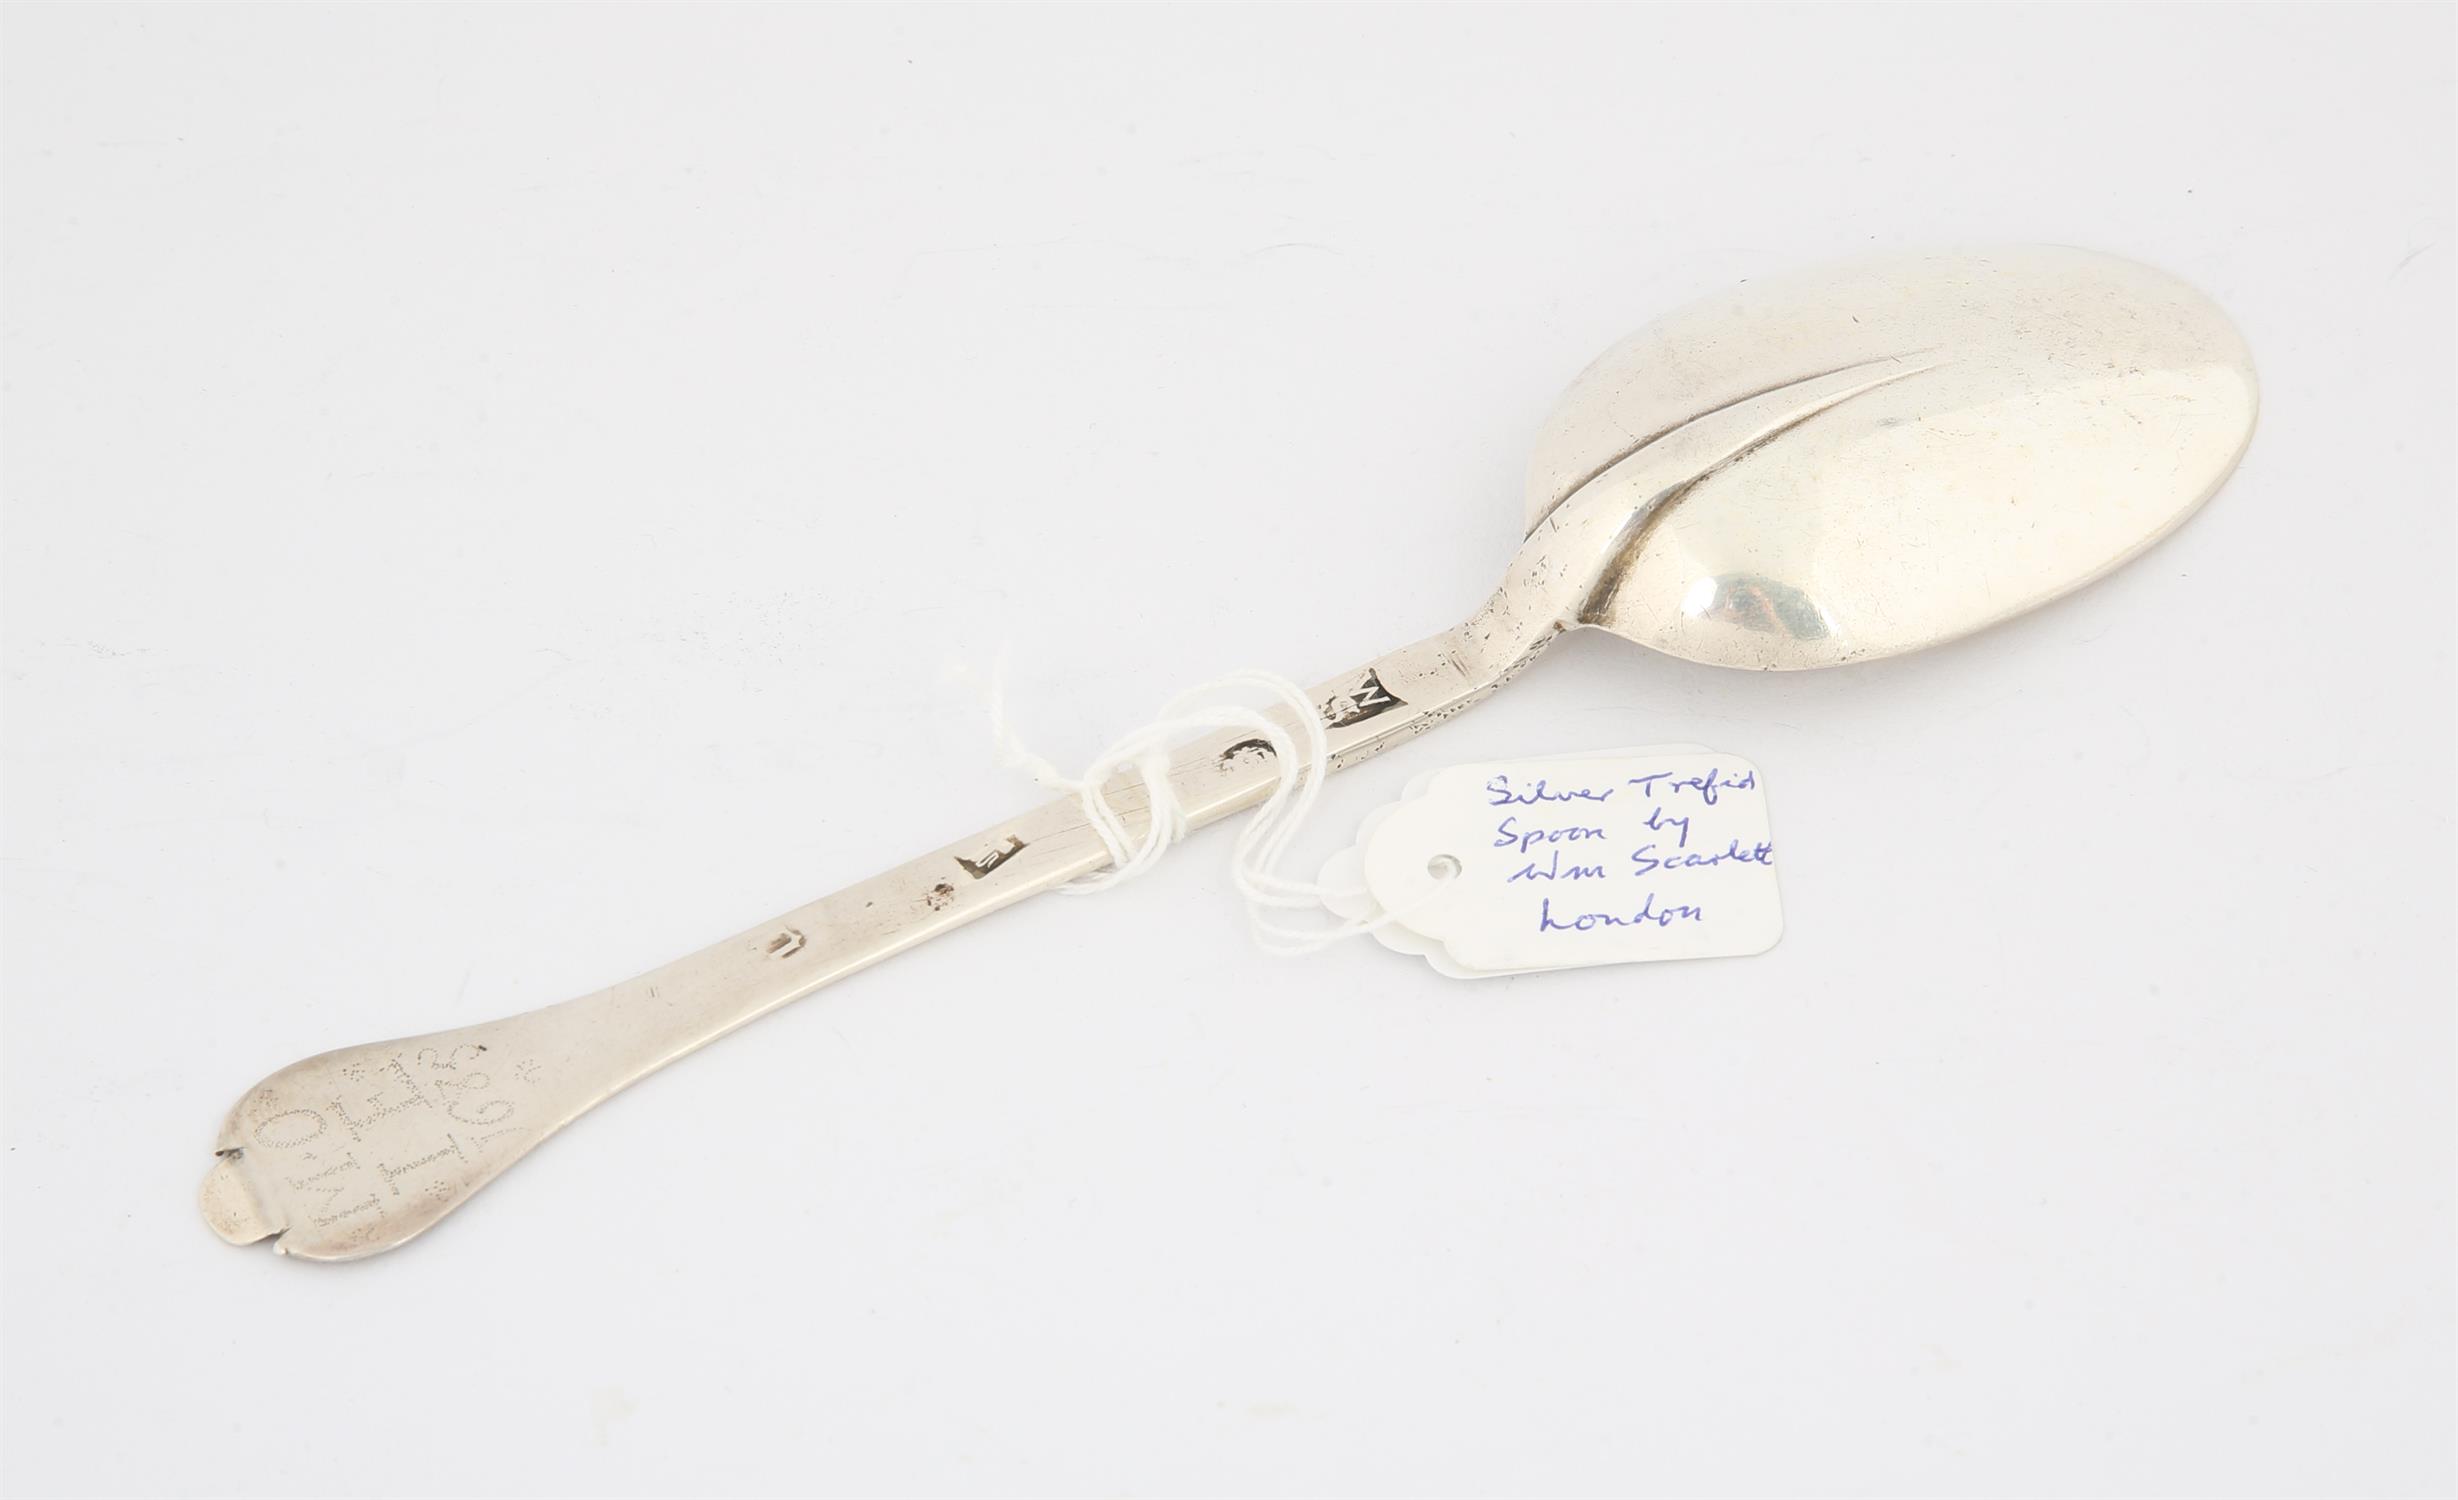 Late 17th/early 18th century century silver trifid end spoon, London, by William Scarlett, - Image 2 of 2